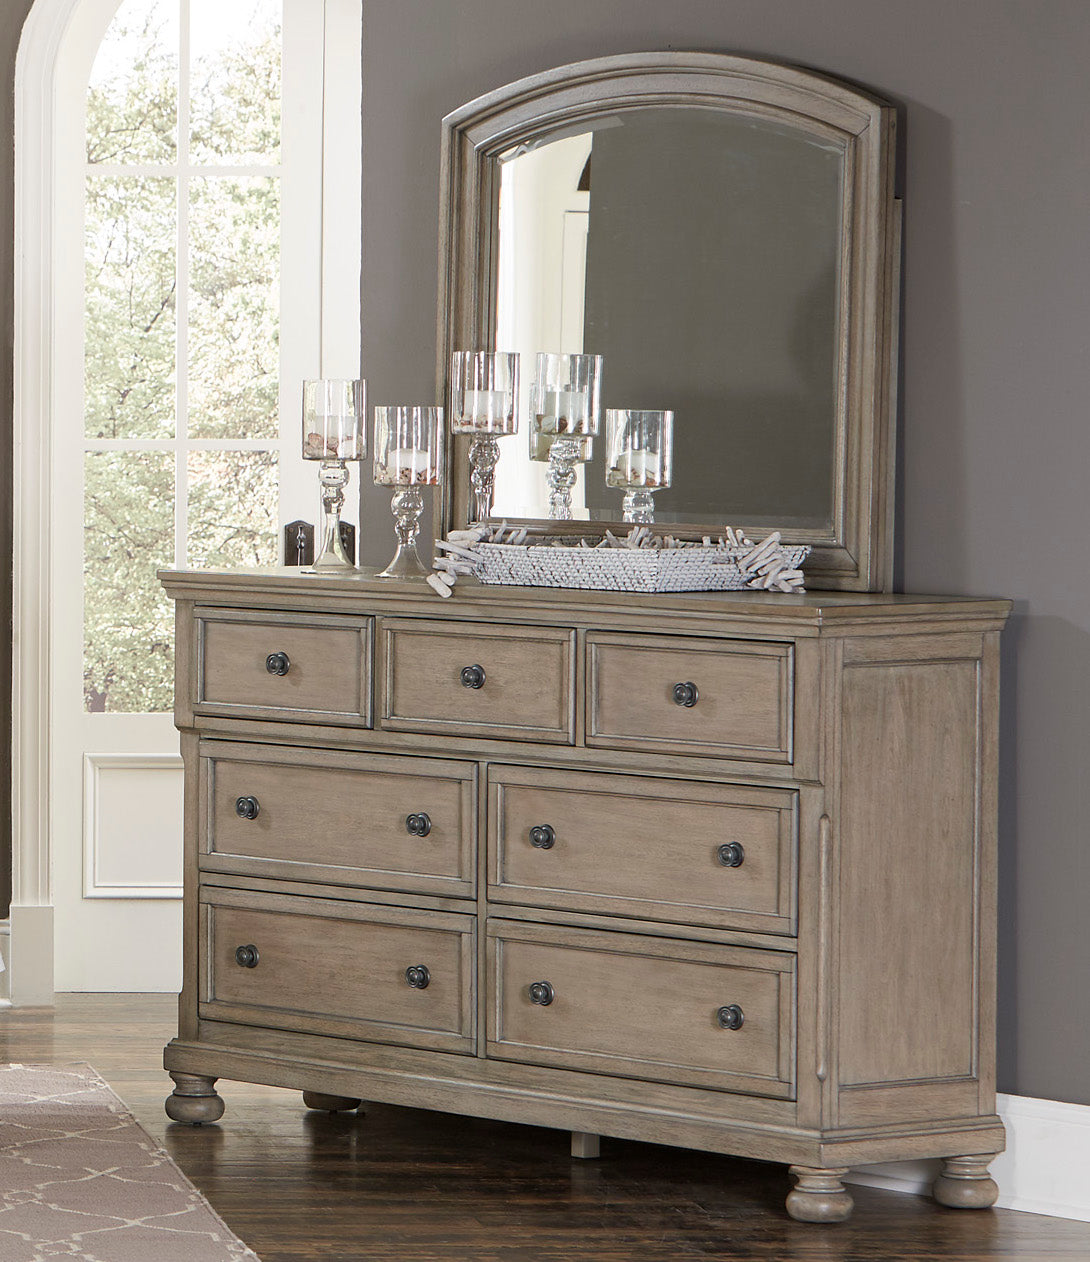 Broville Rustic Dresser with Hidden Drawer Mirror in Weathered Wood